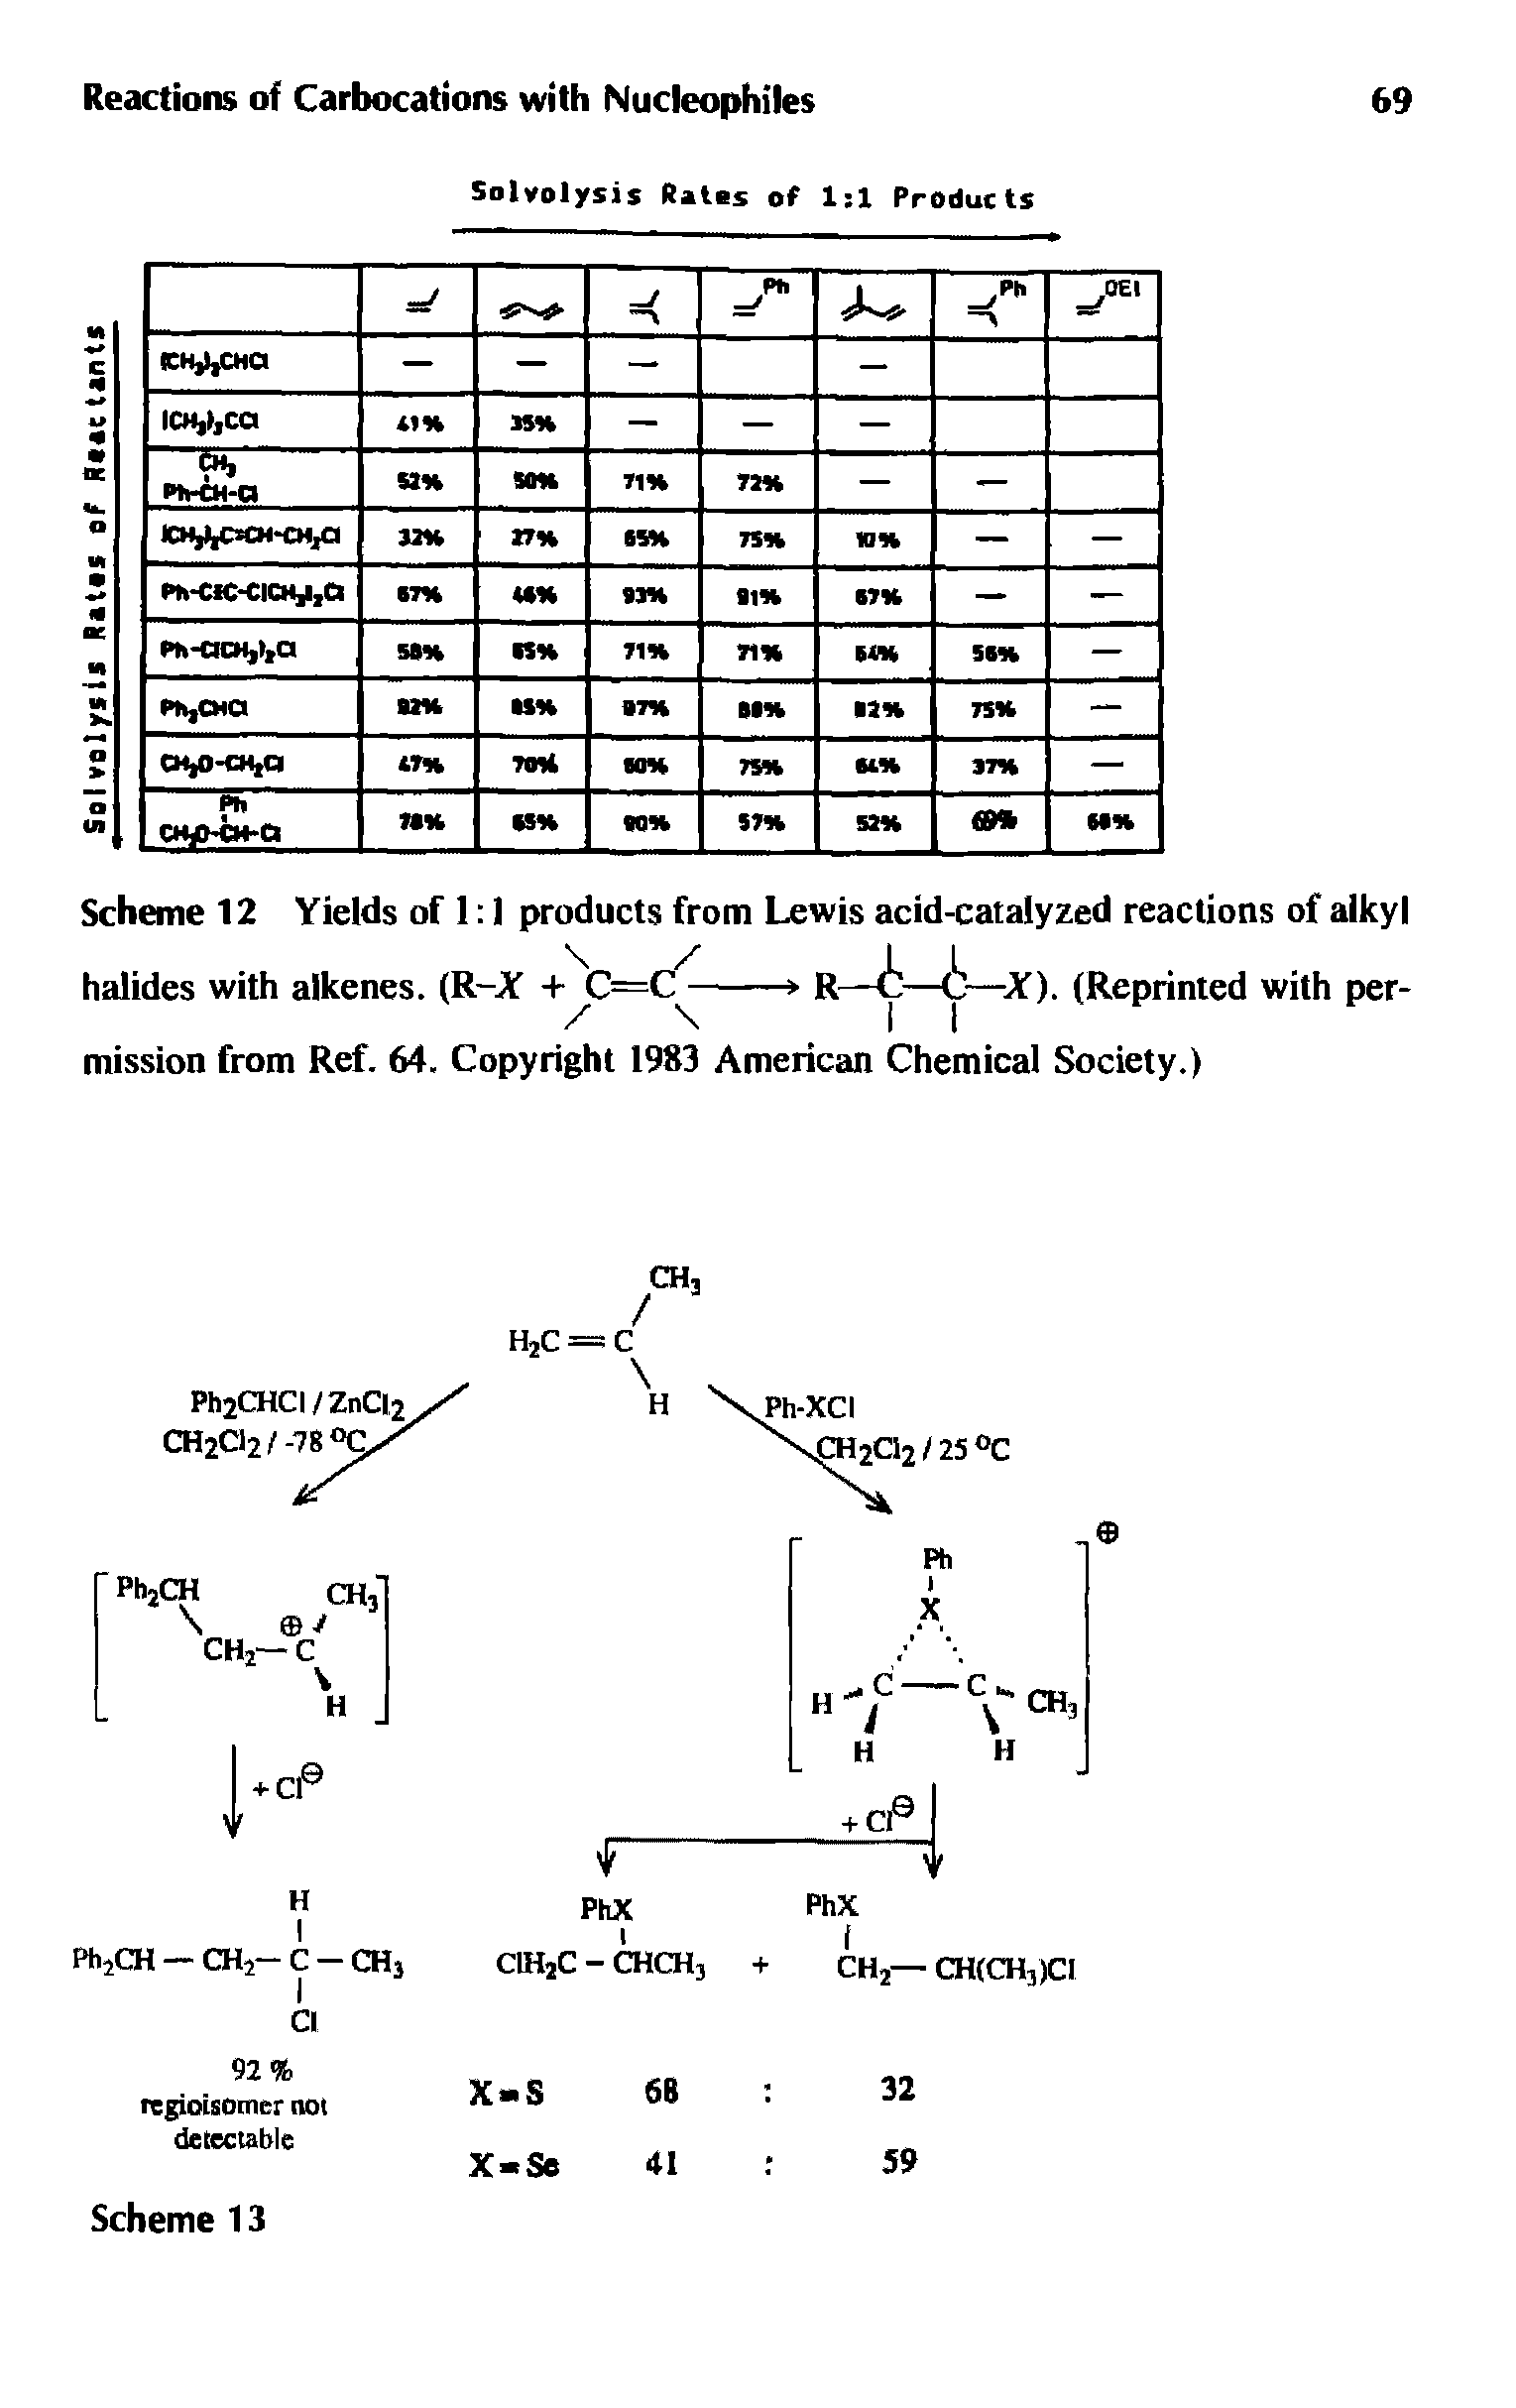 Scheme 12 Yields of 1 1 products from Lewis acid-catalyzed reactions of alkyl halides with alkenes. (R-Jf + C=C-------- R——X). (Reprinted with per-...